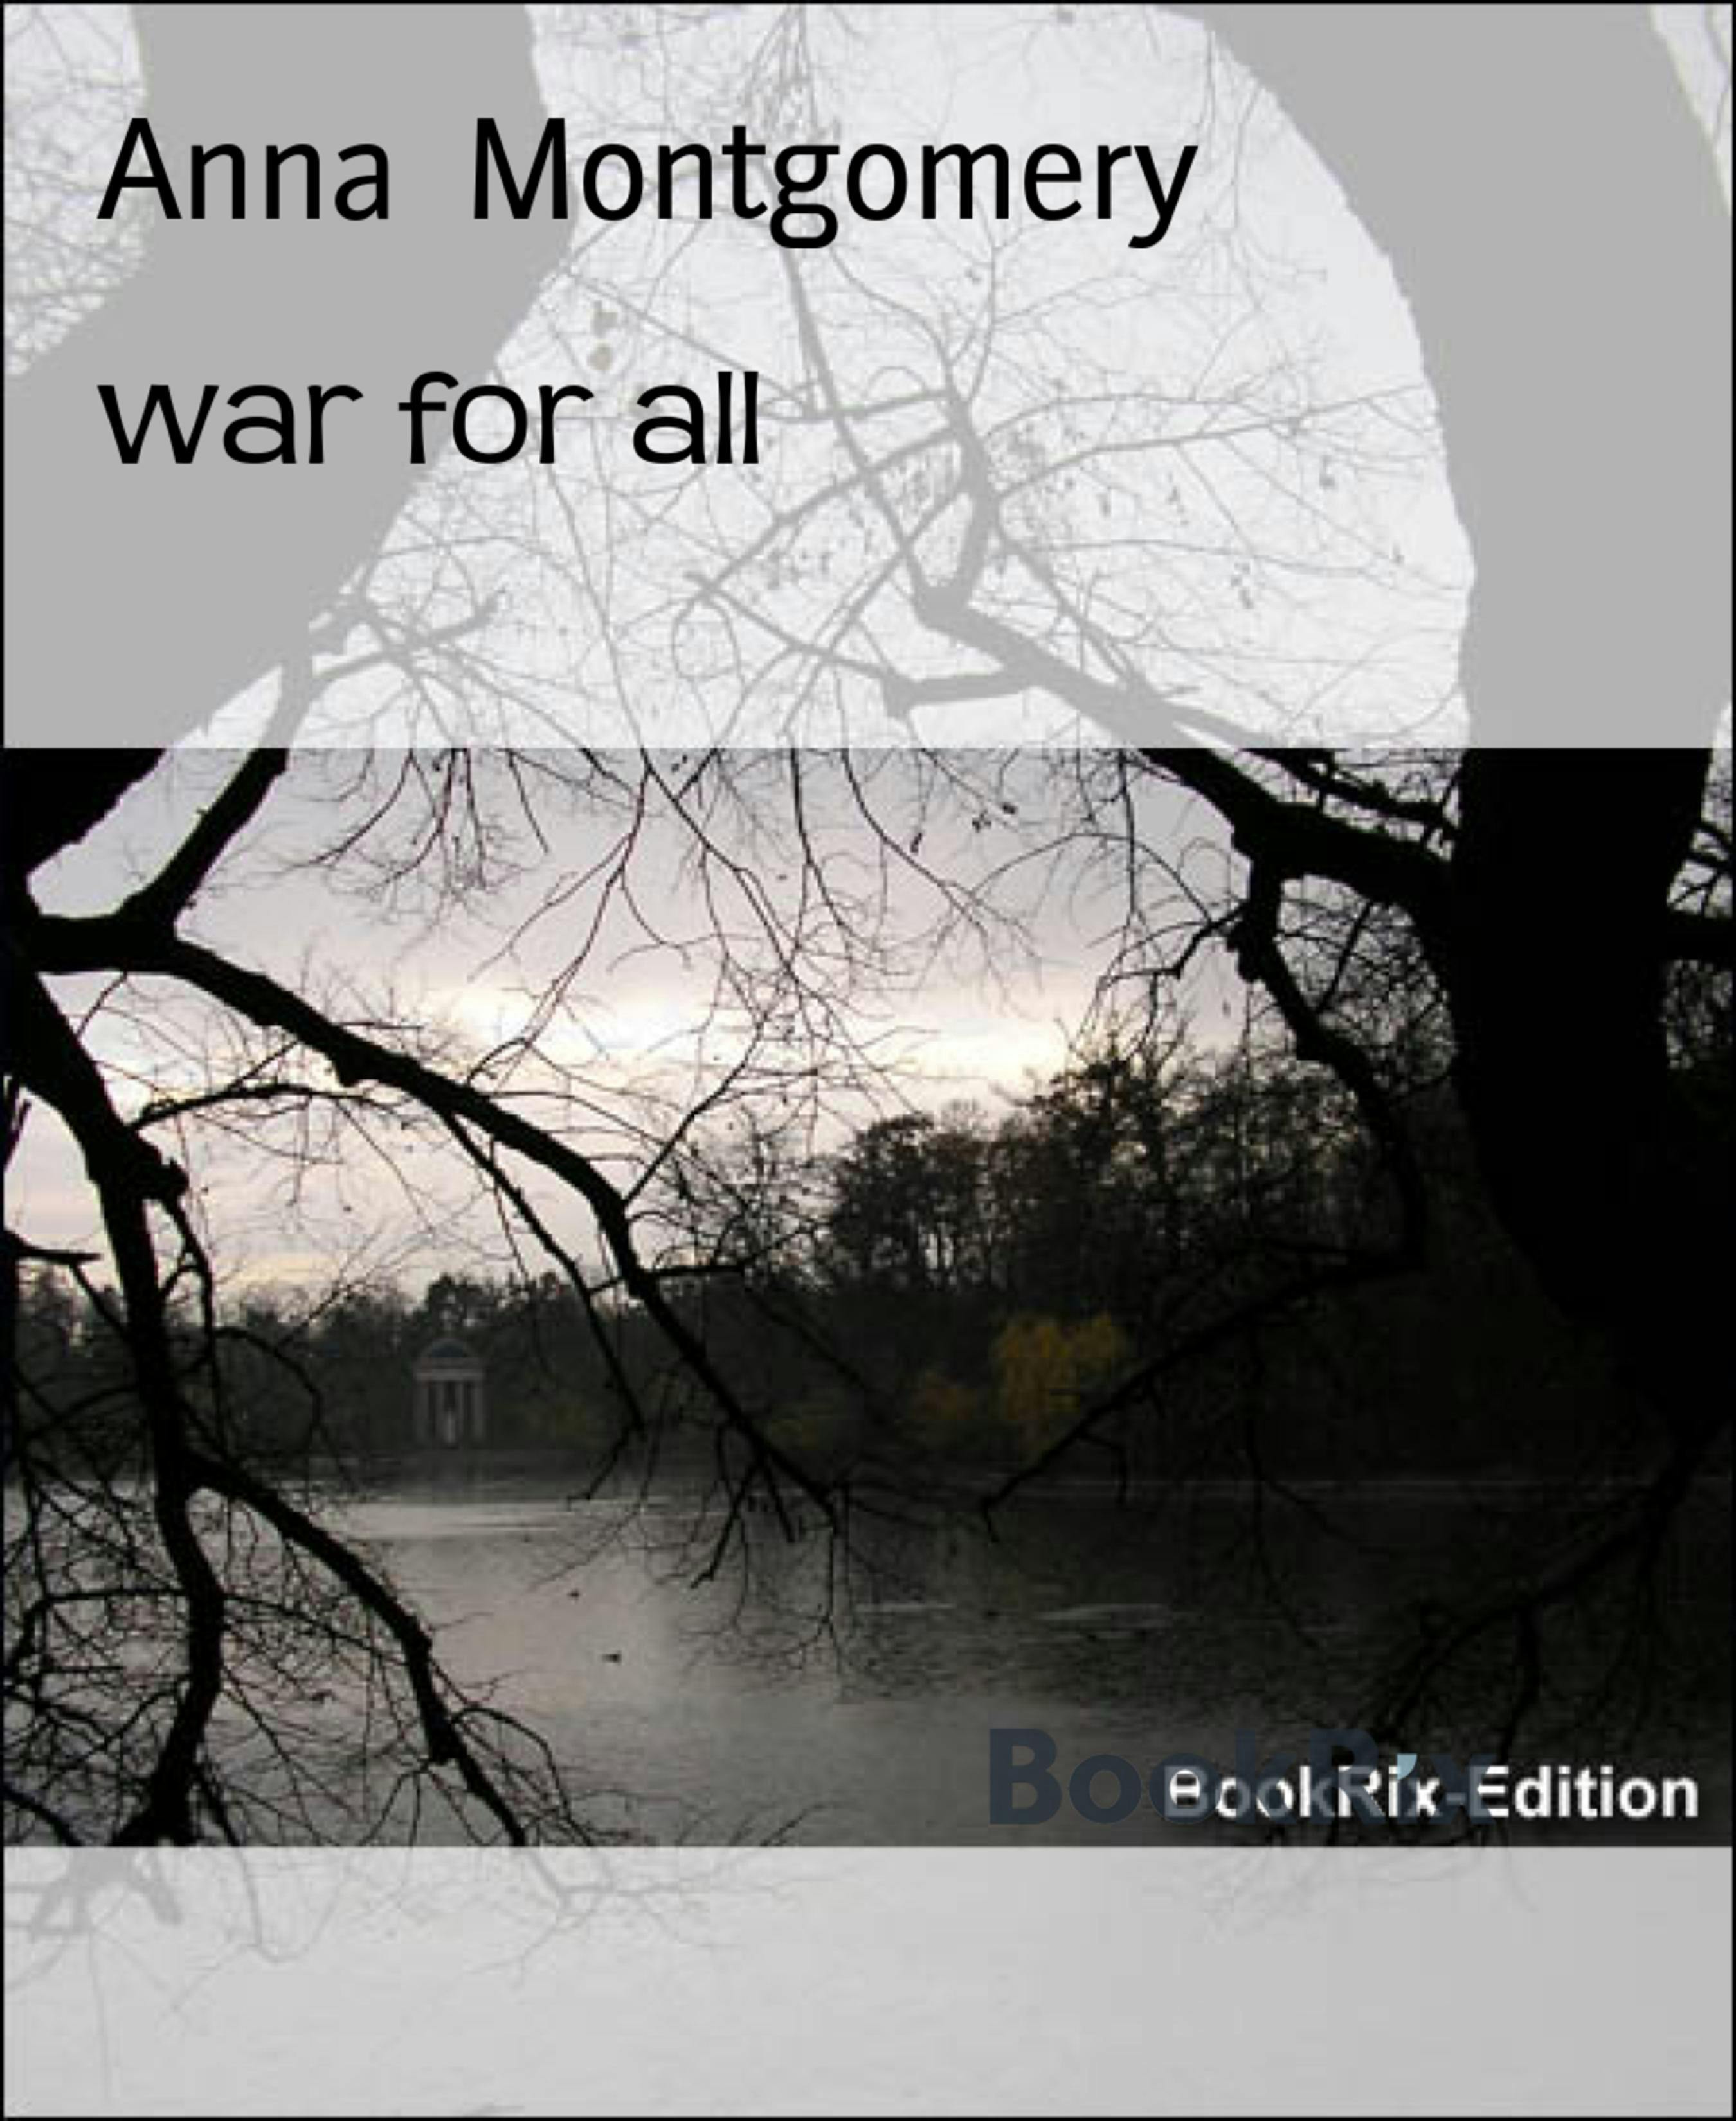 war for all: bring it on - Anna Montgomery